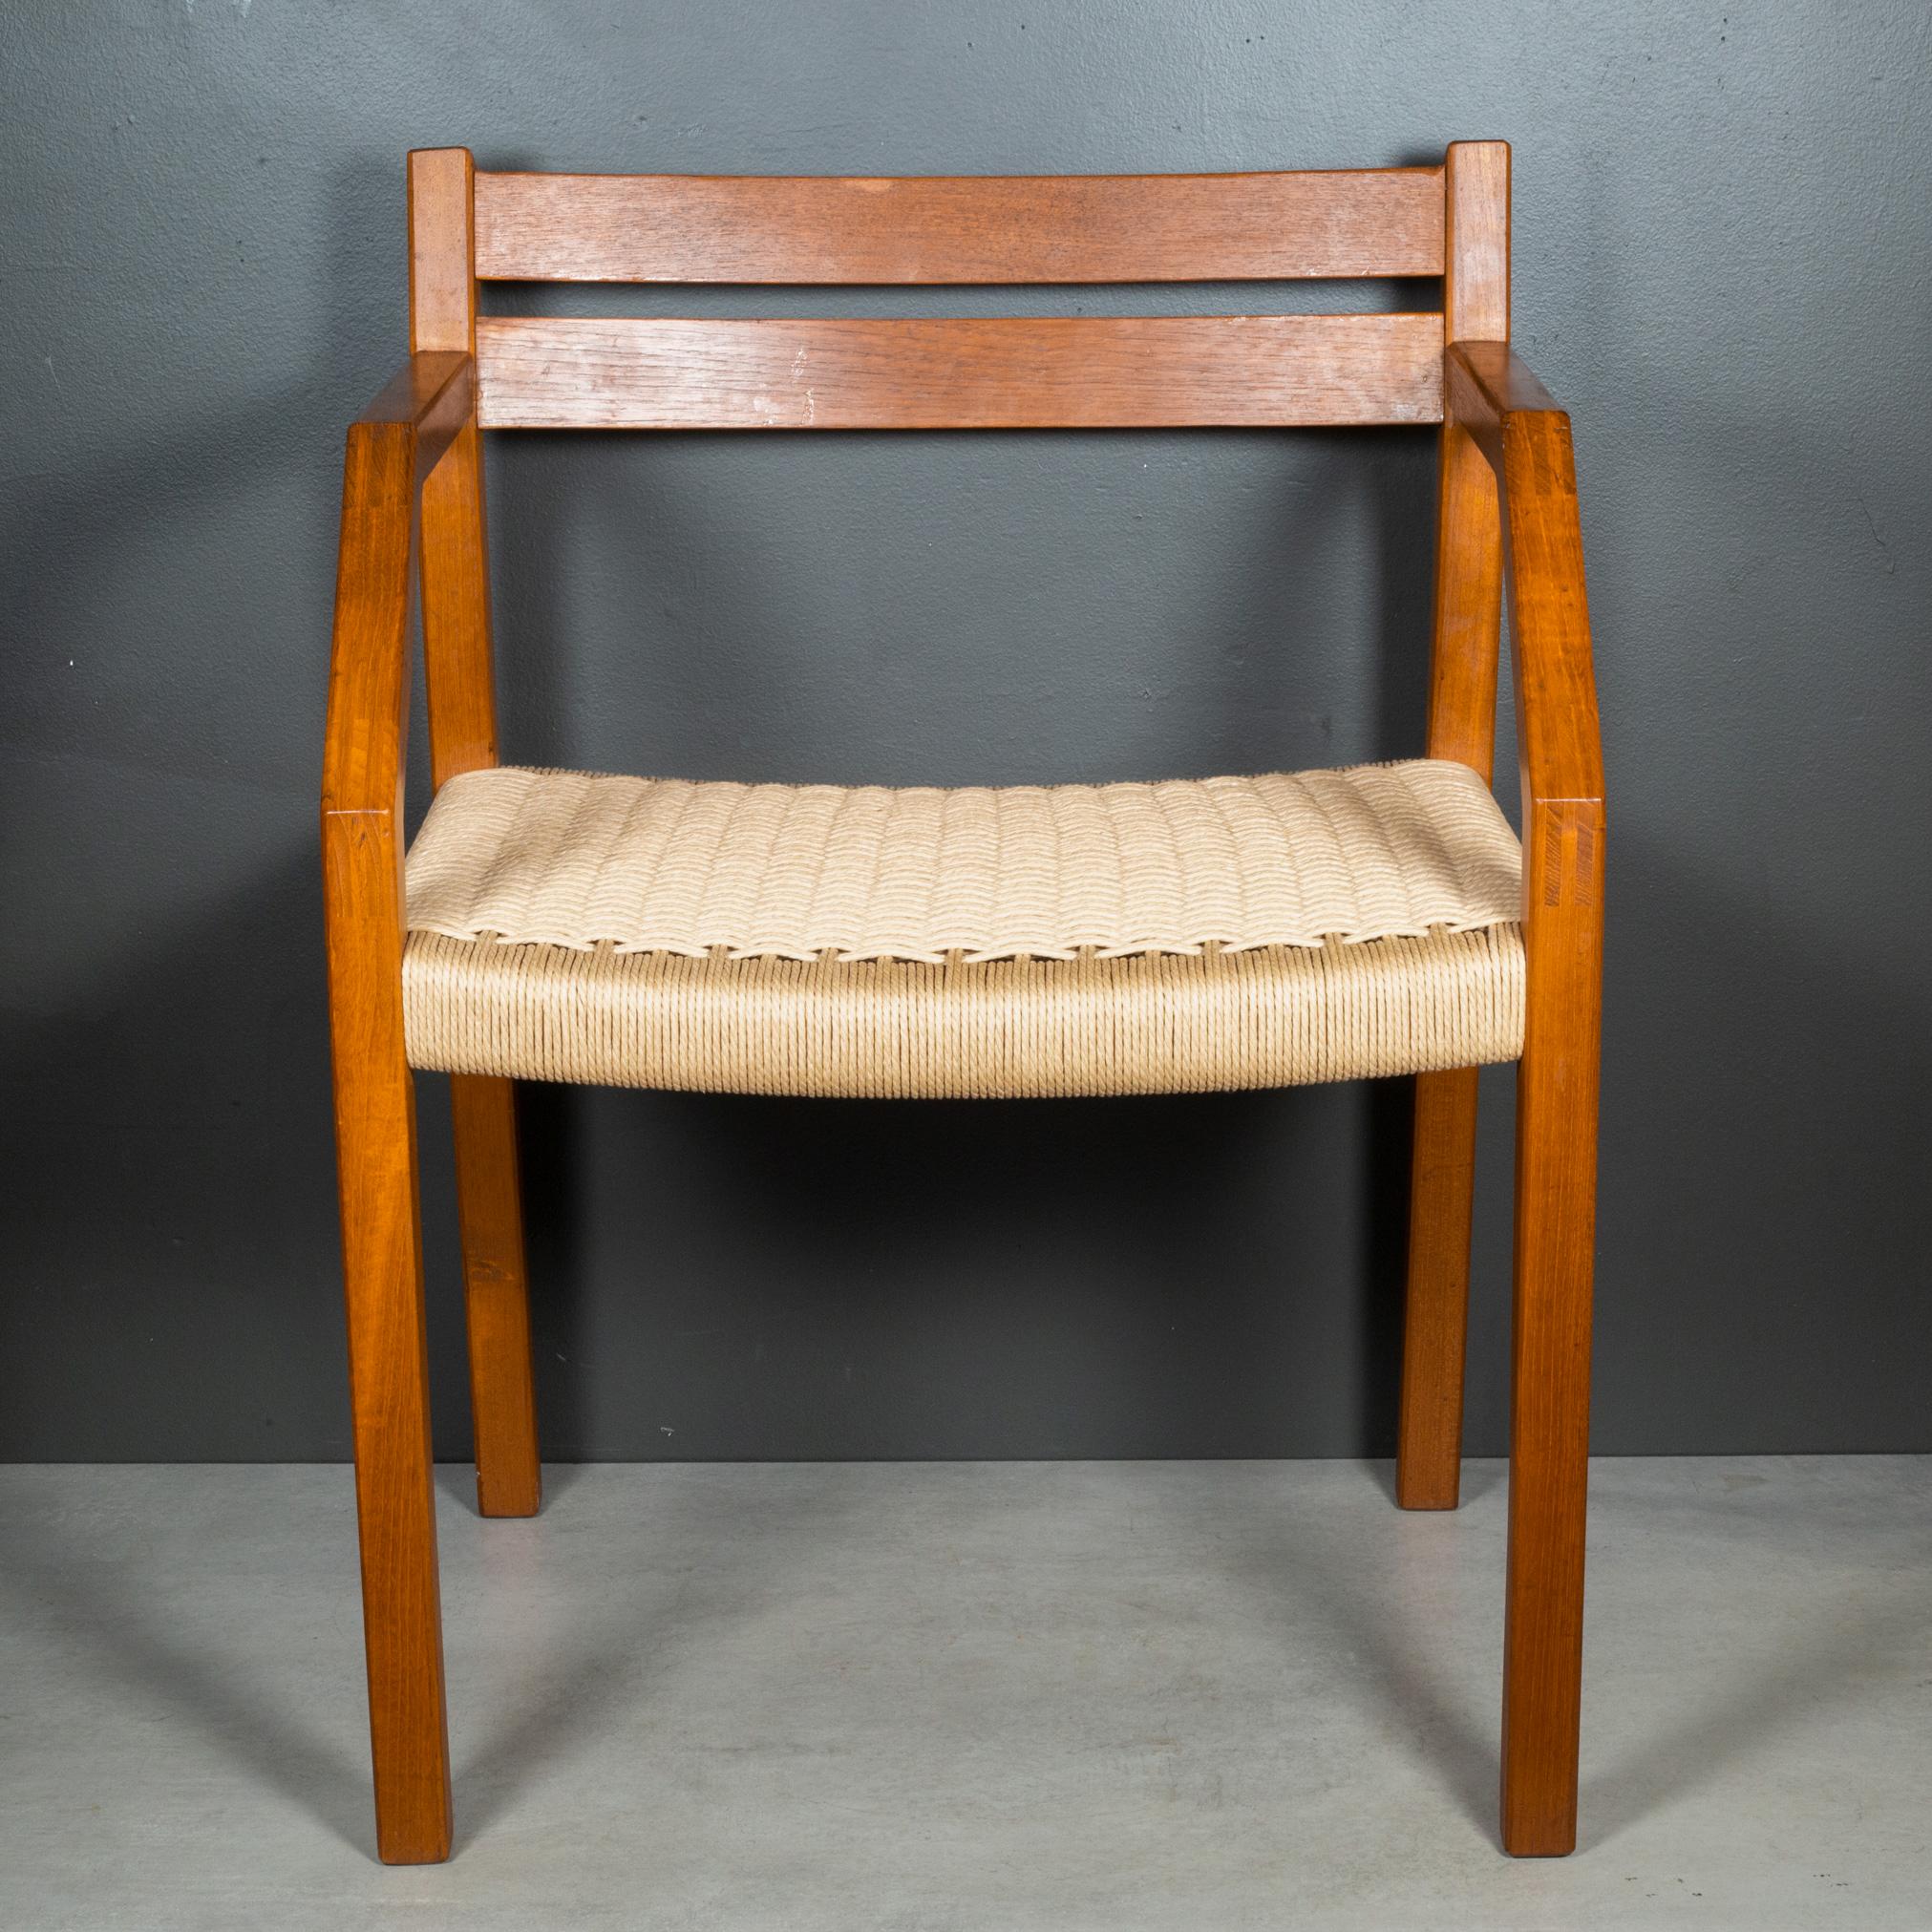 ABOUT

A set of six J.L. Moller Model #404 dining chairs, designed in 1974 by Jorgen Henrik Moller for J.L. Moller Mobelfabrik of Denmark. The chairs are crafted of solid teak and paper cord seats. Two rare armchairs which are slightly wider and